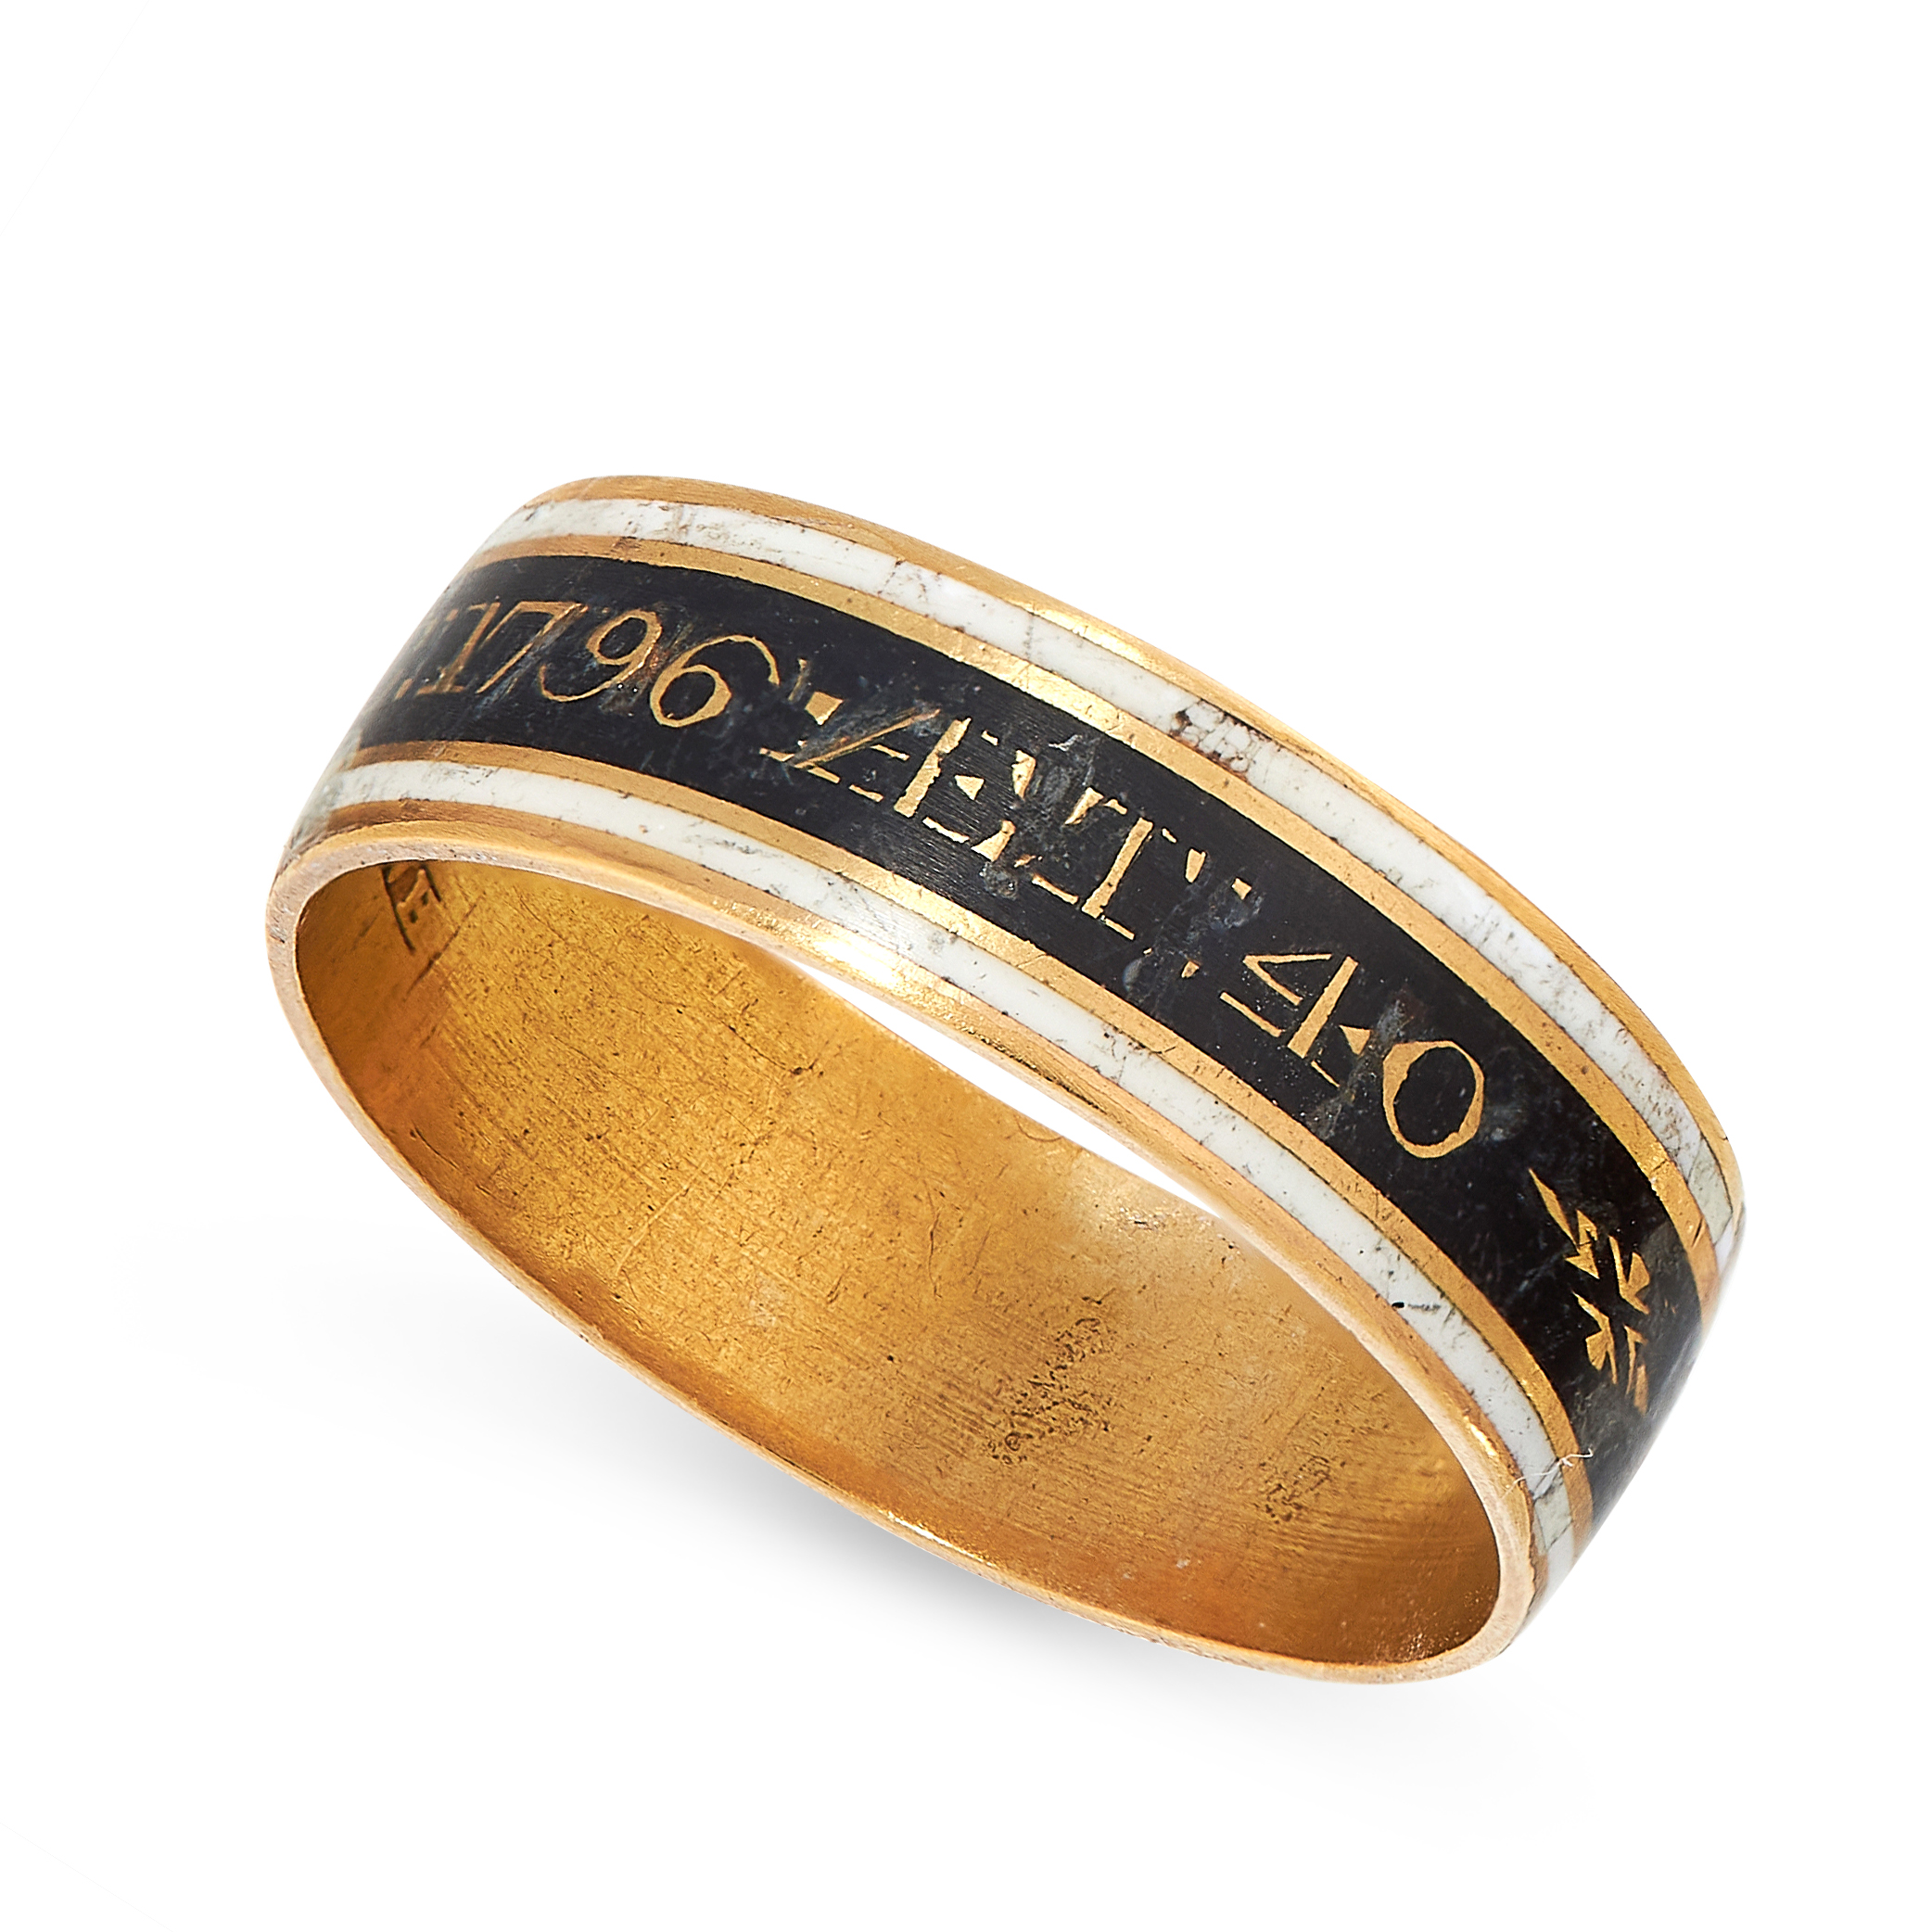 ANTIQUE ENAMEL MOURNING RING CIRCA 1796 in 18ct yellow gold, of band design, set with black and - Image 2 of 2